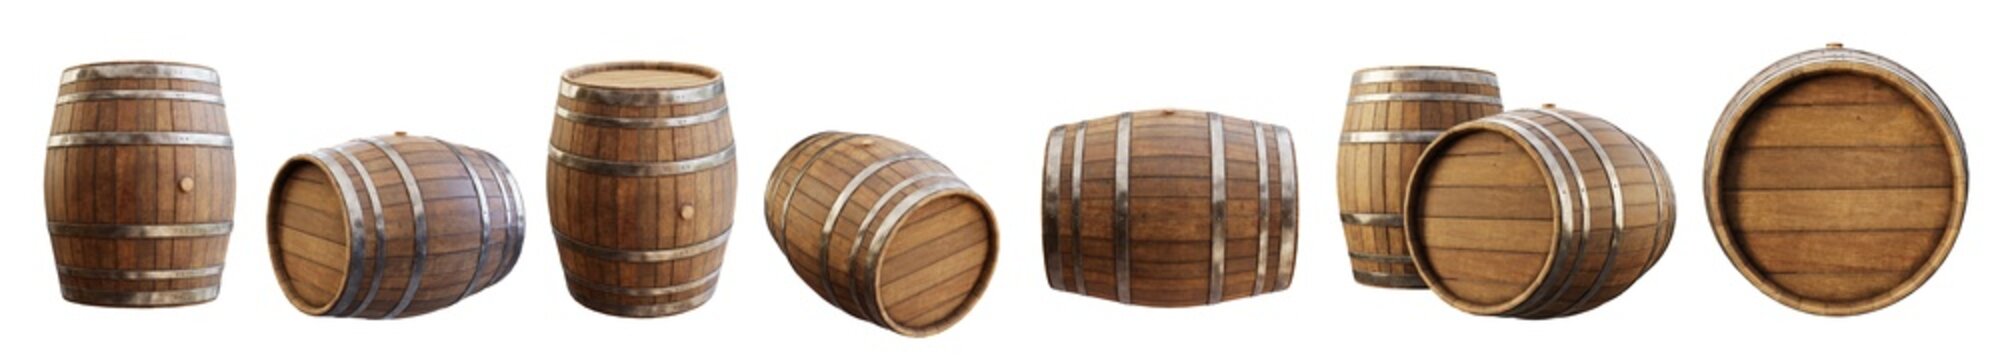 Wooden barrel, view from different angles, isolated on transparent background. Clipping path indluded. 3D render.